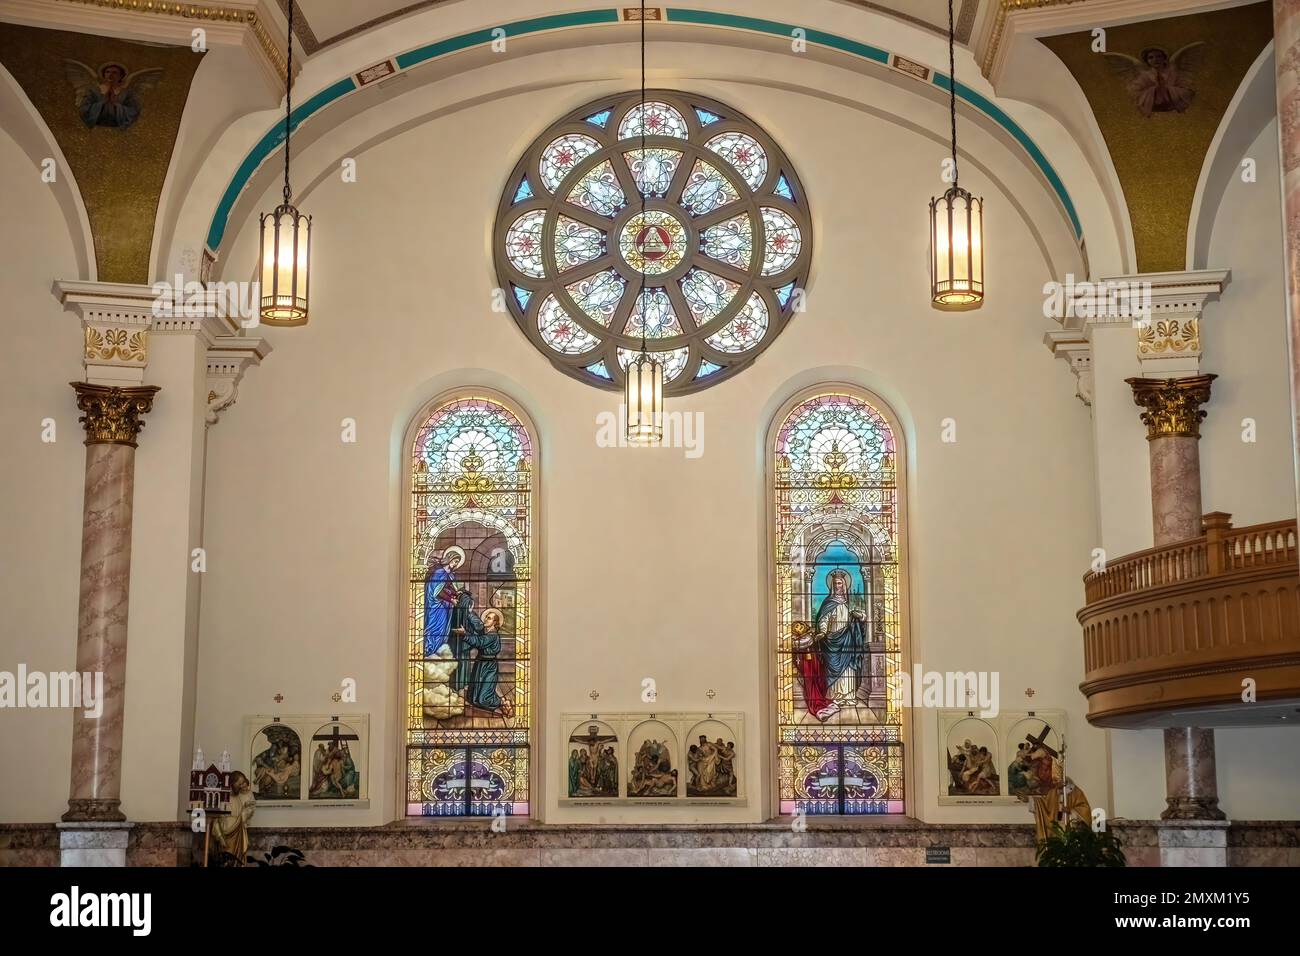 St. Simon Stock on left, St. Hedwig, on right, Rose window of The Trinity above on West Transept Wall of Basilica of St. Stanislaus Catholic Church. Stock Photo